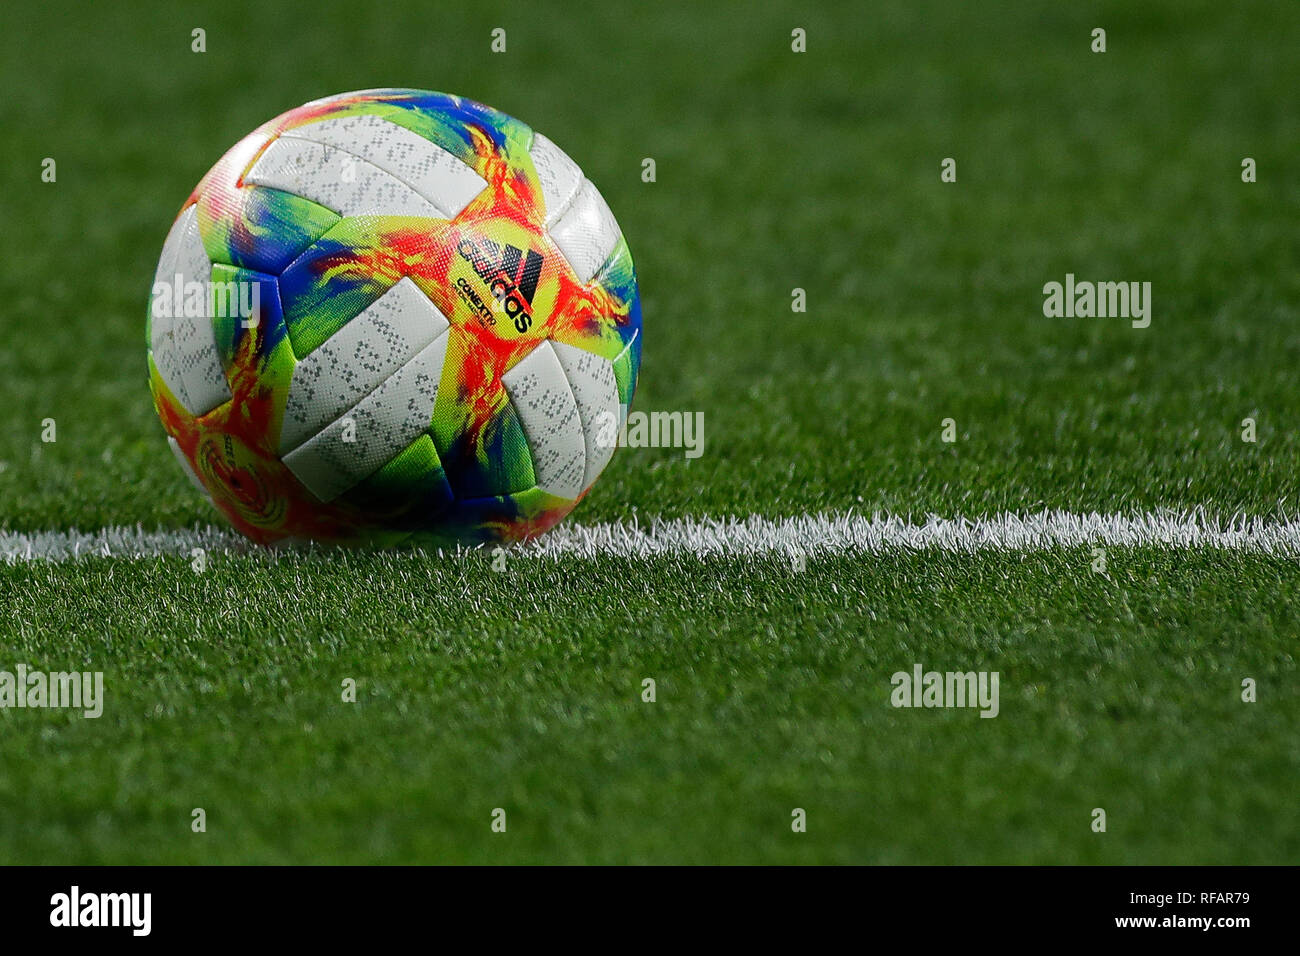 Adidas football 2019 High Resolution Stock Photography and Images - Alamy